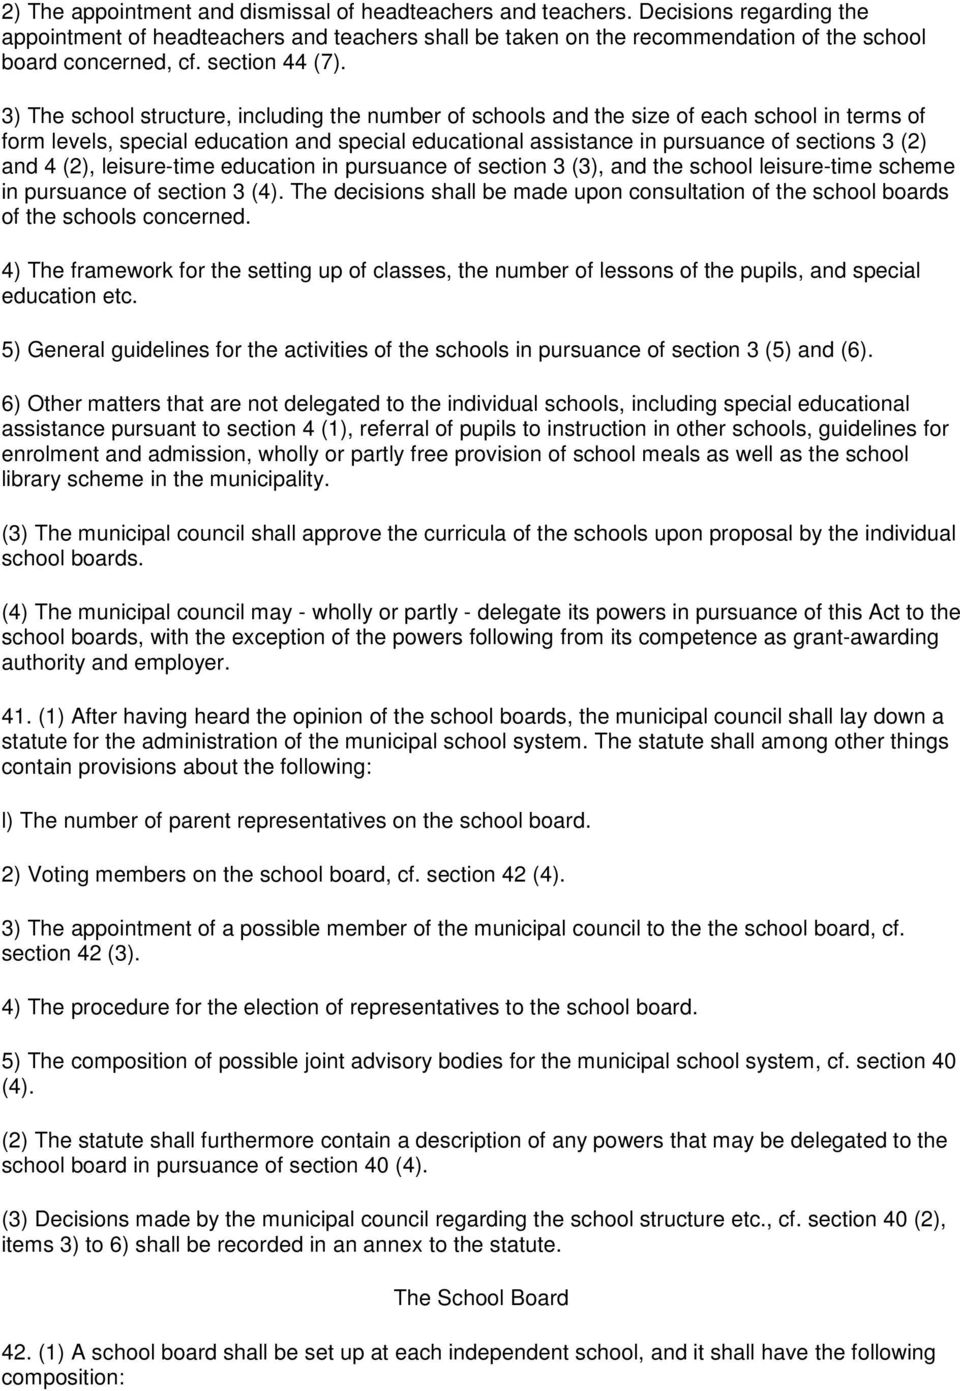 3) The school structure, including the number of schools and the size of each school in terms of form levels, special education and special educational assistance in pursuance of sections 3 (2) and 4